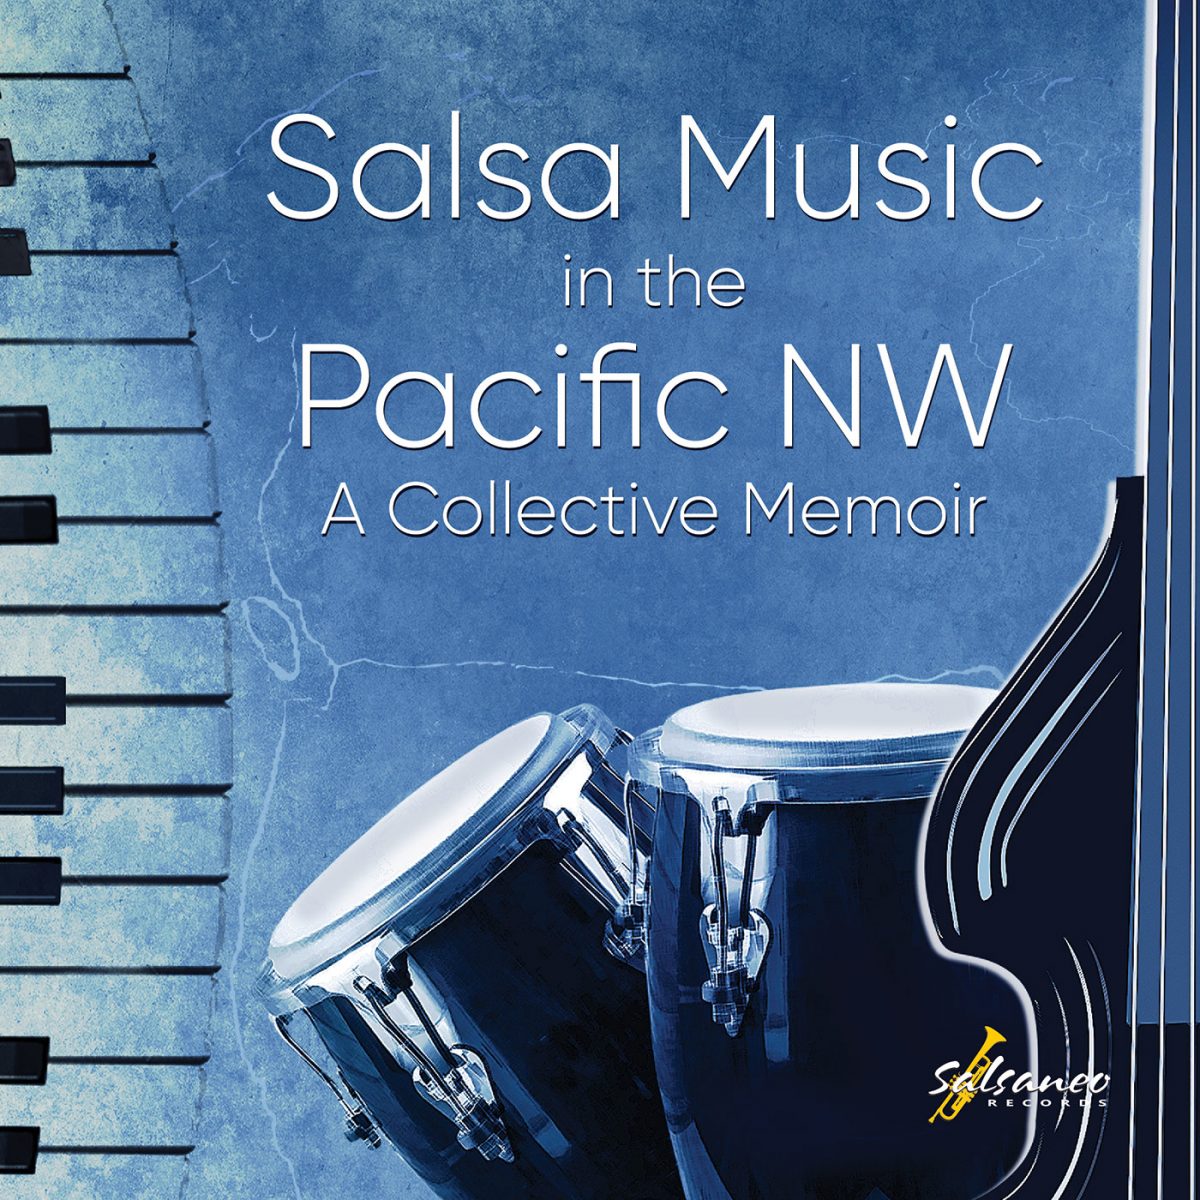 Salsa Music In Pacific NW / A Collective Memoir Records) – Club